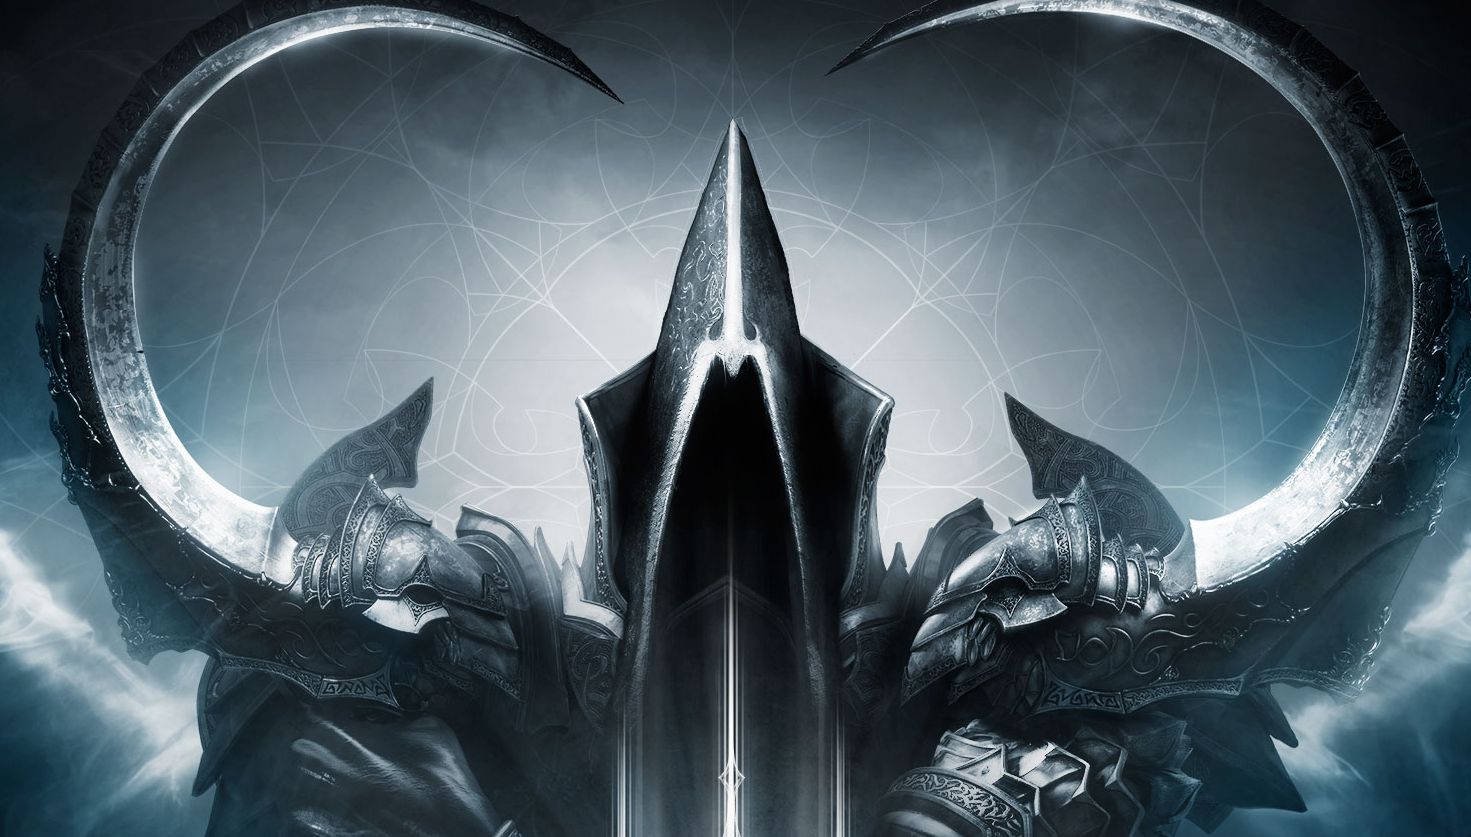 Diablo 3 Reaper Of Souls Announced Expansion Adds New Class Zone Enemies Pc Gamer